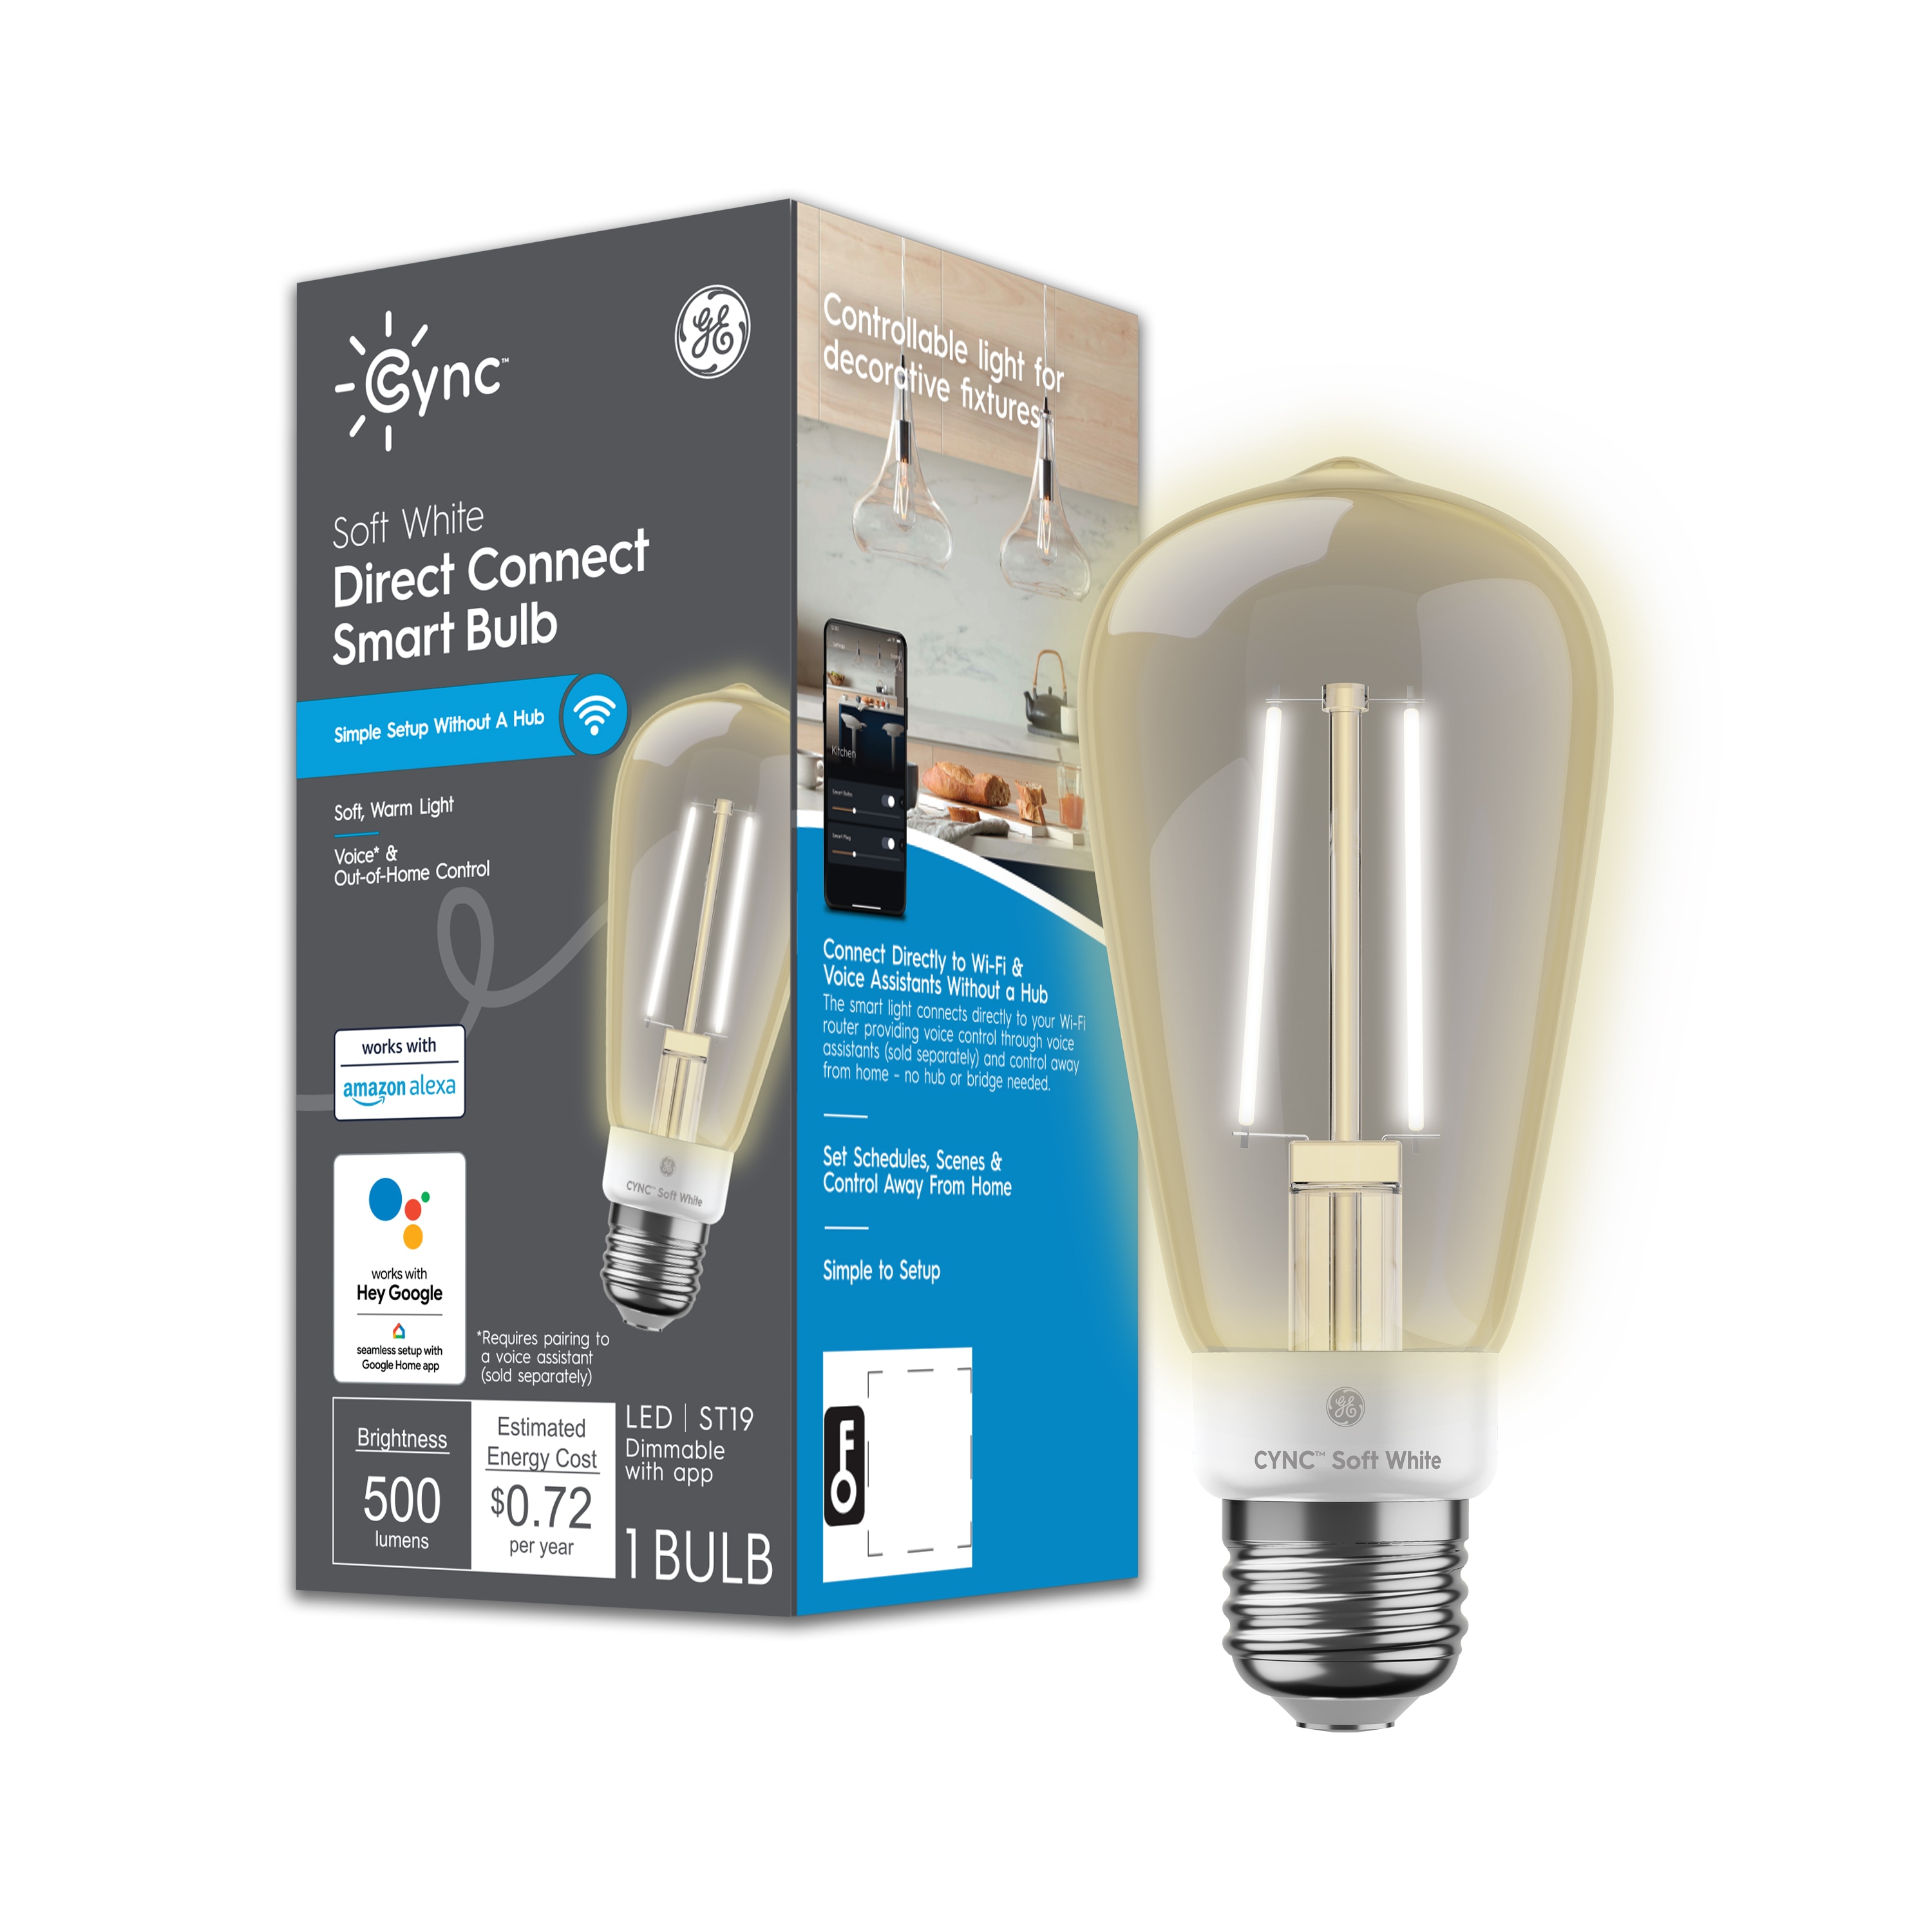 Light up your life with 32 feet of smart LED lighting for $14 - CNET